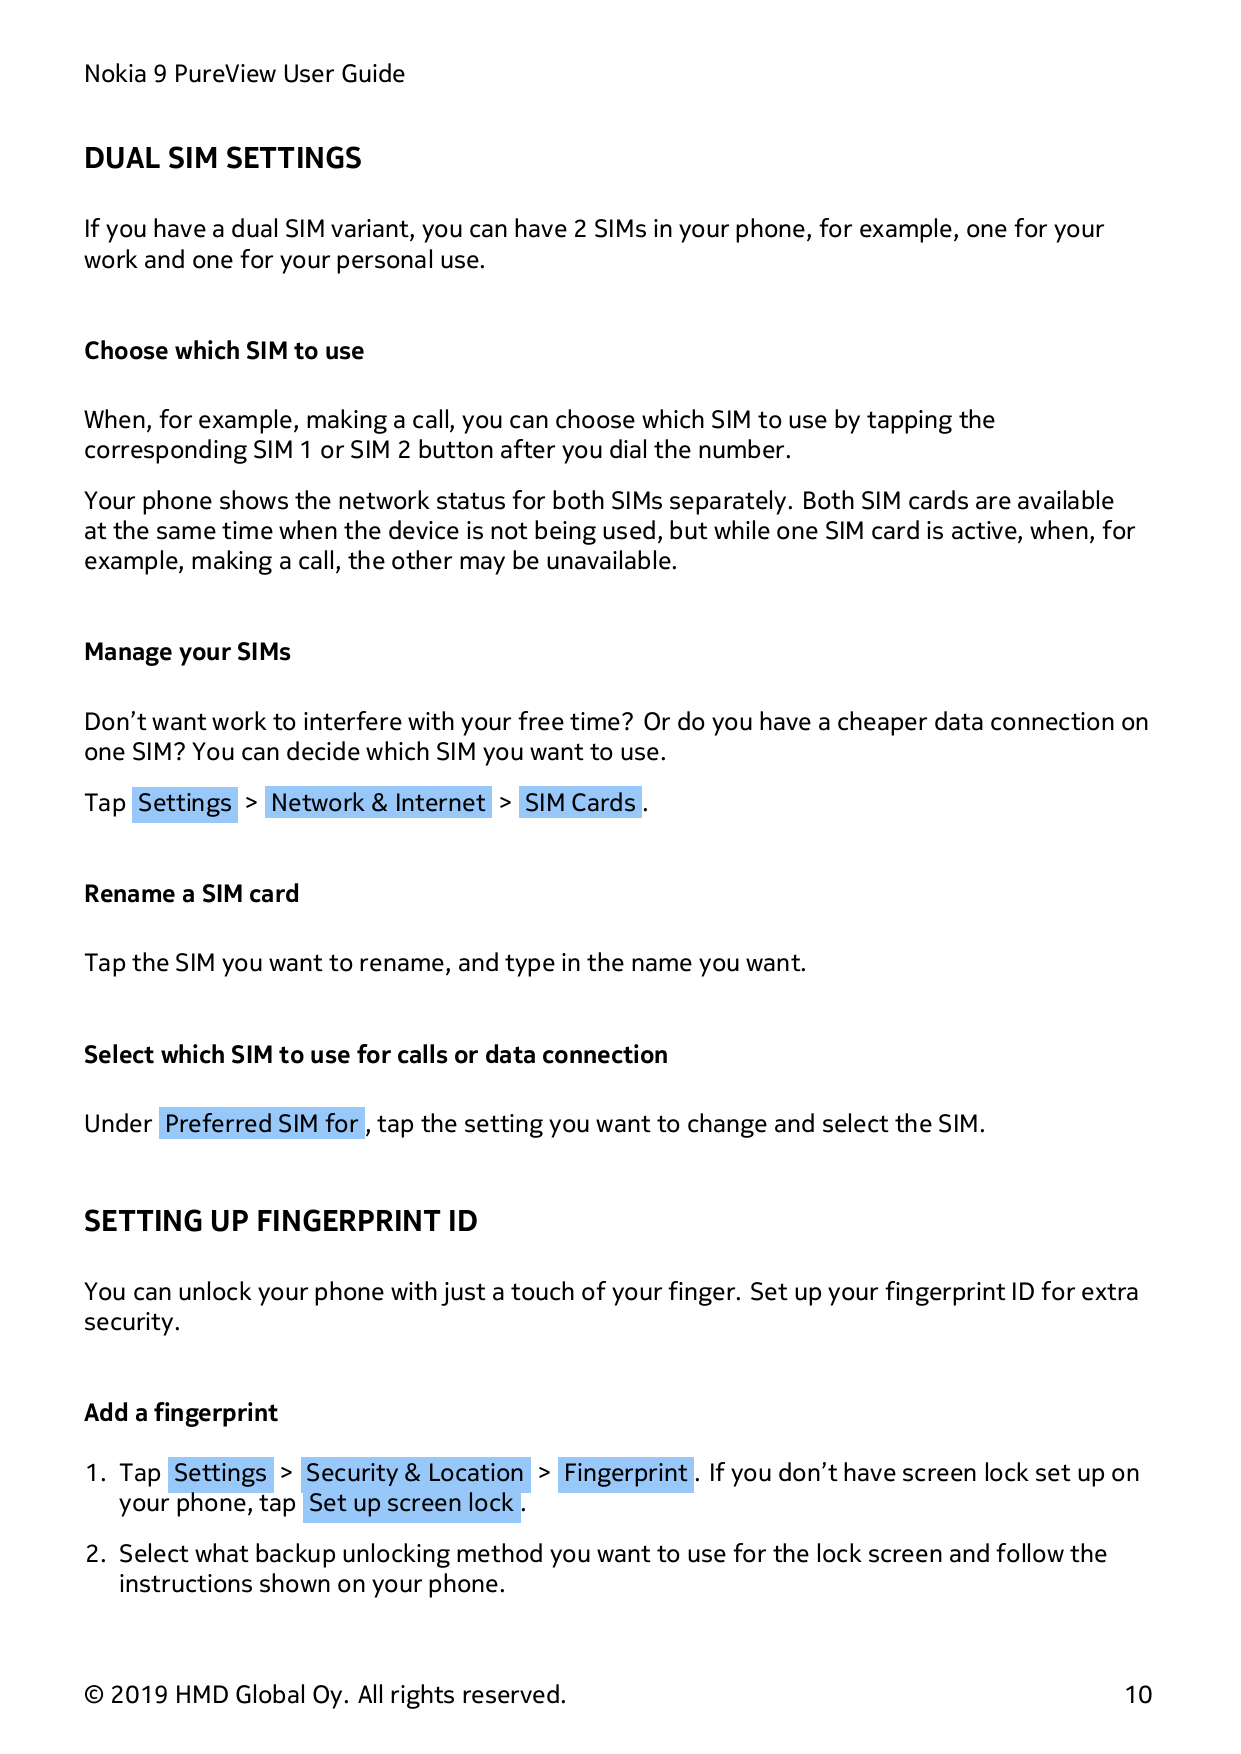 Nokia 9 PureView User GuideDUAL SIM SETTINGSIf you have a dual SIM variant, you can have 2 SIMs in your phone, for example, one 